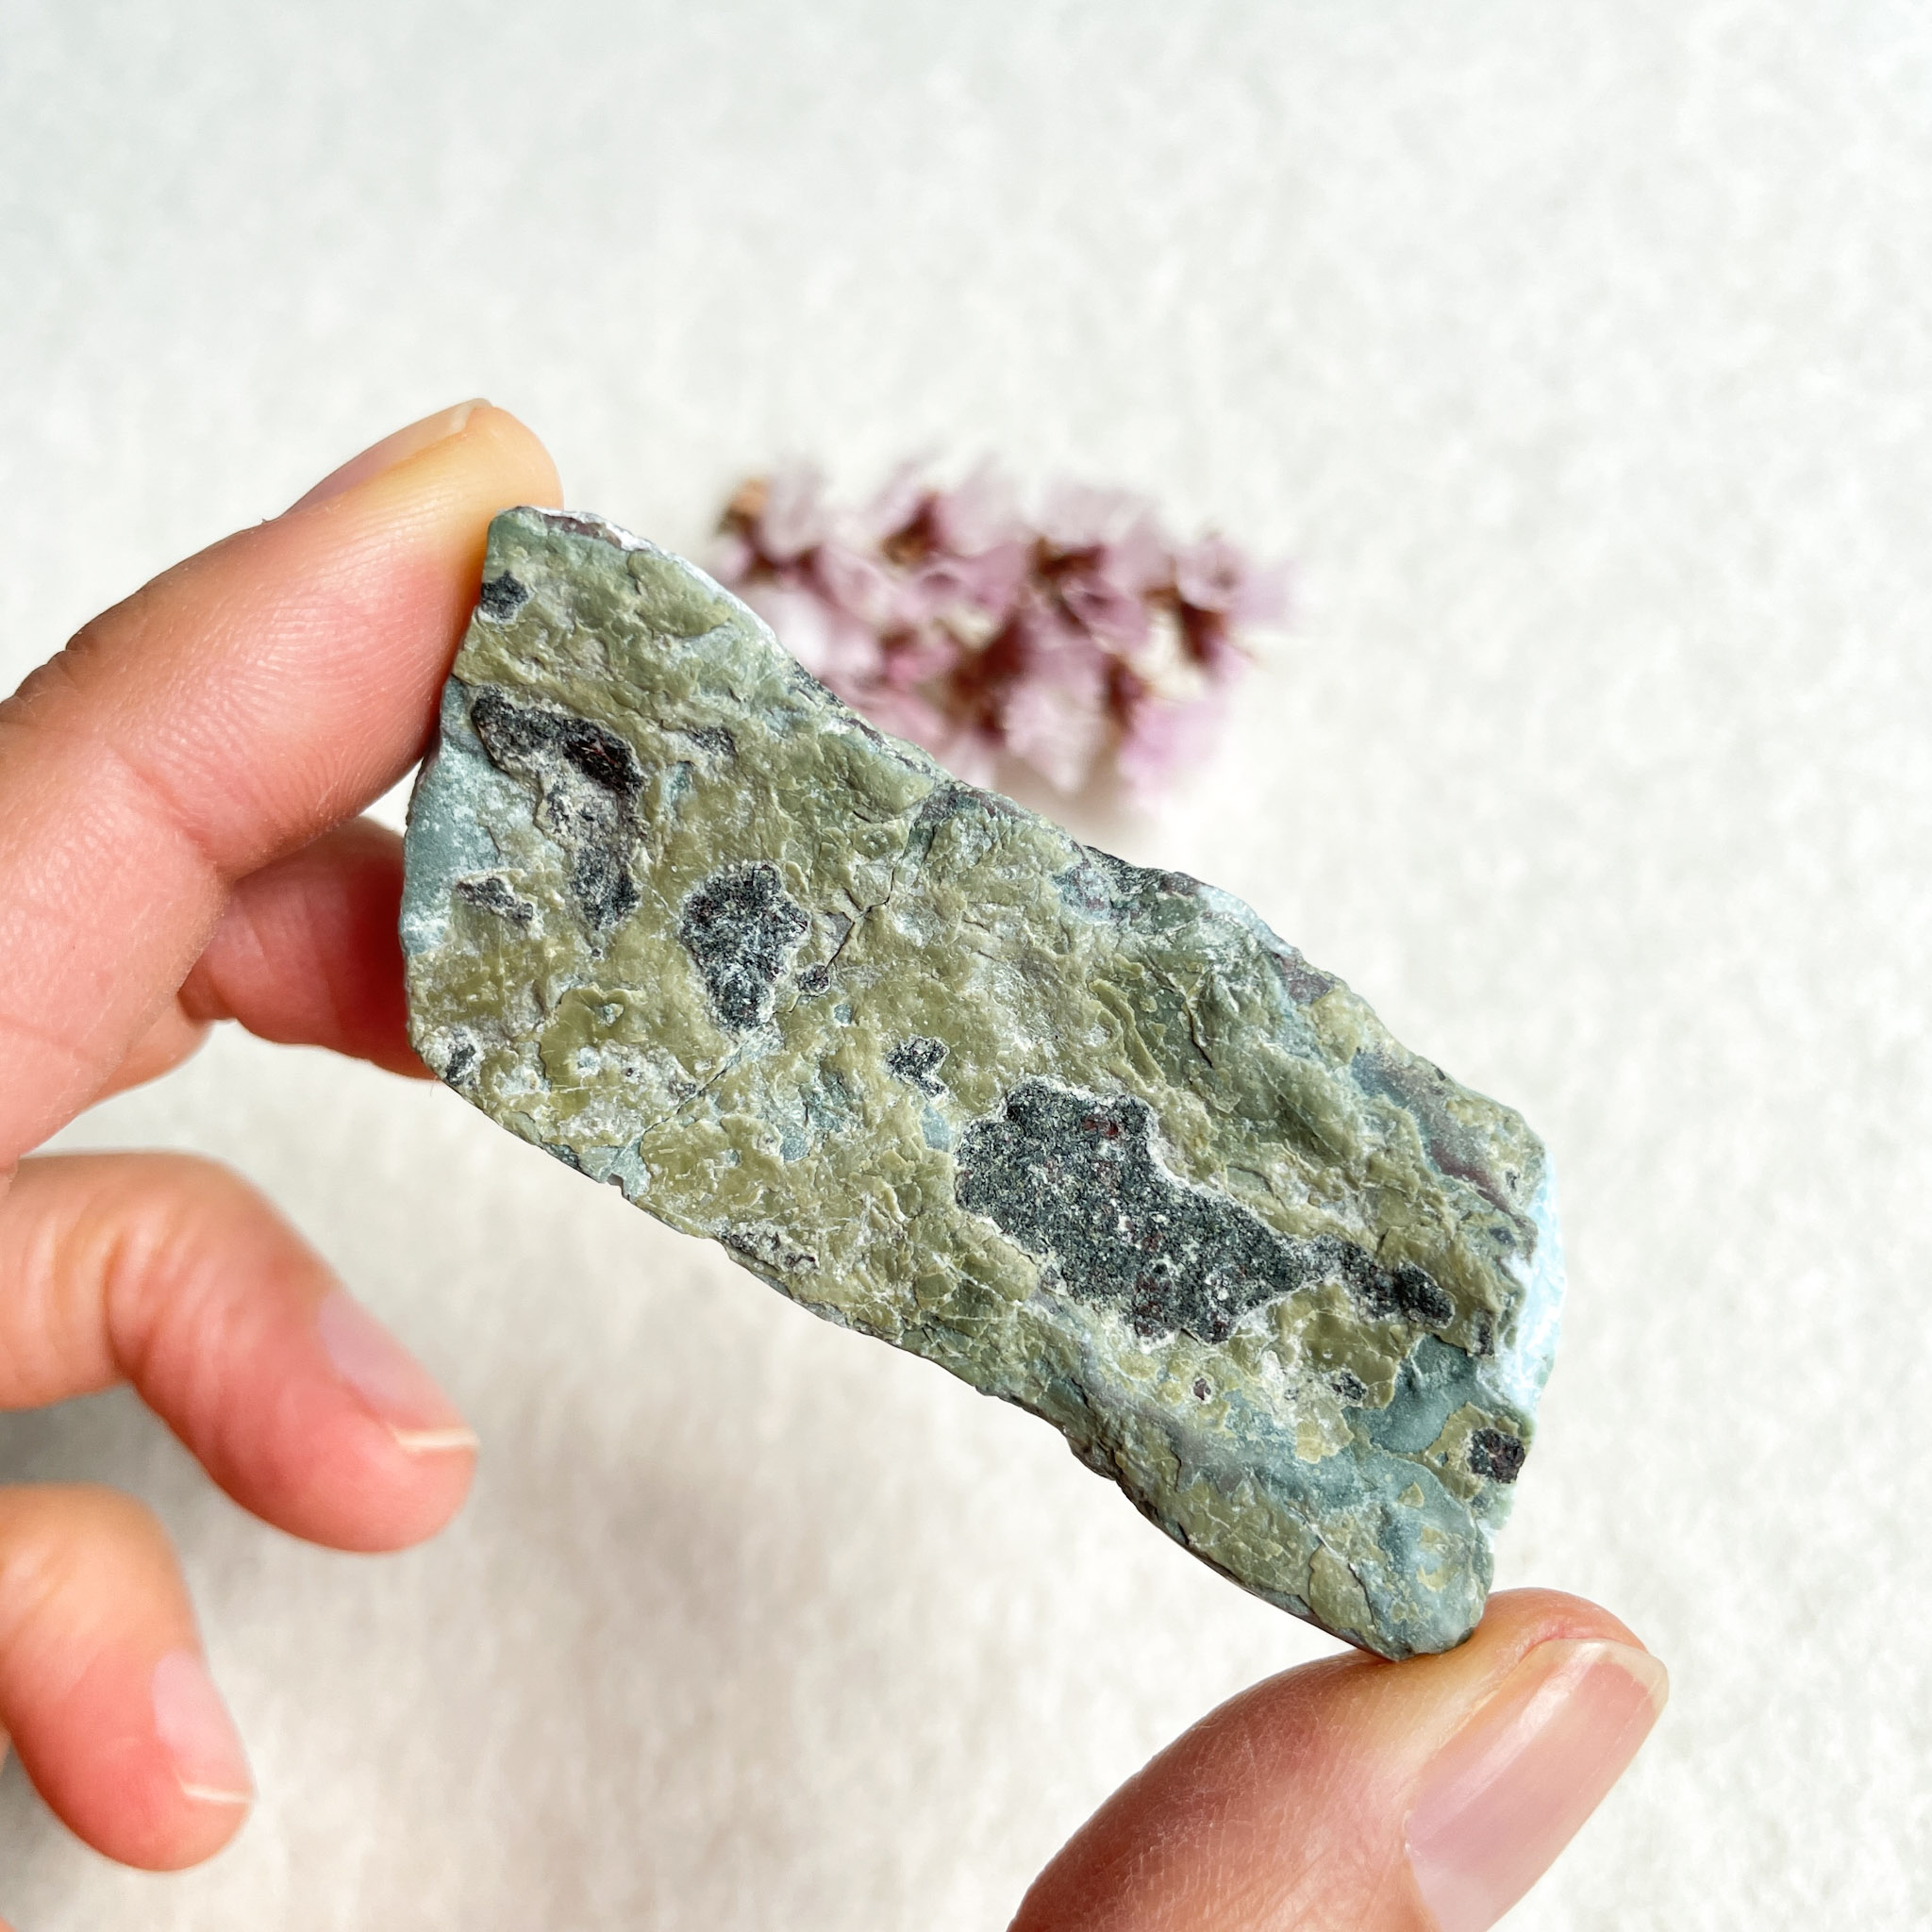 A person holding a slab of green and black rock with small, pink crystal formations in the blurry background.